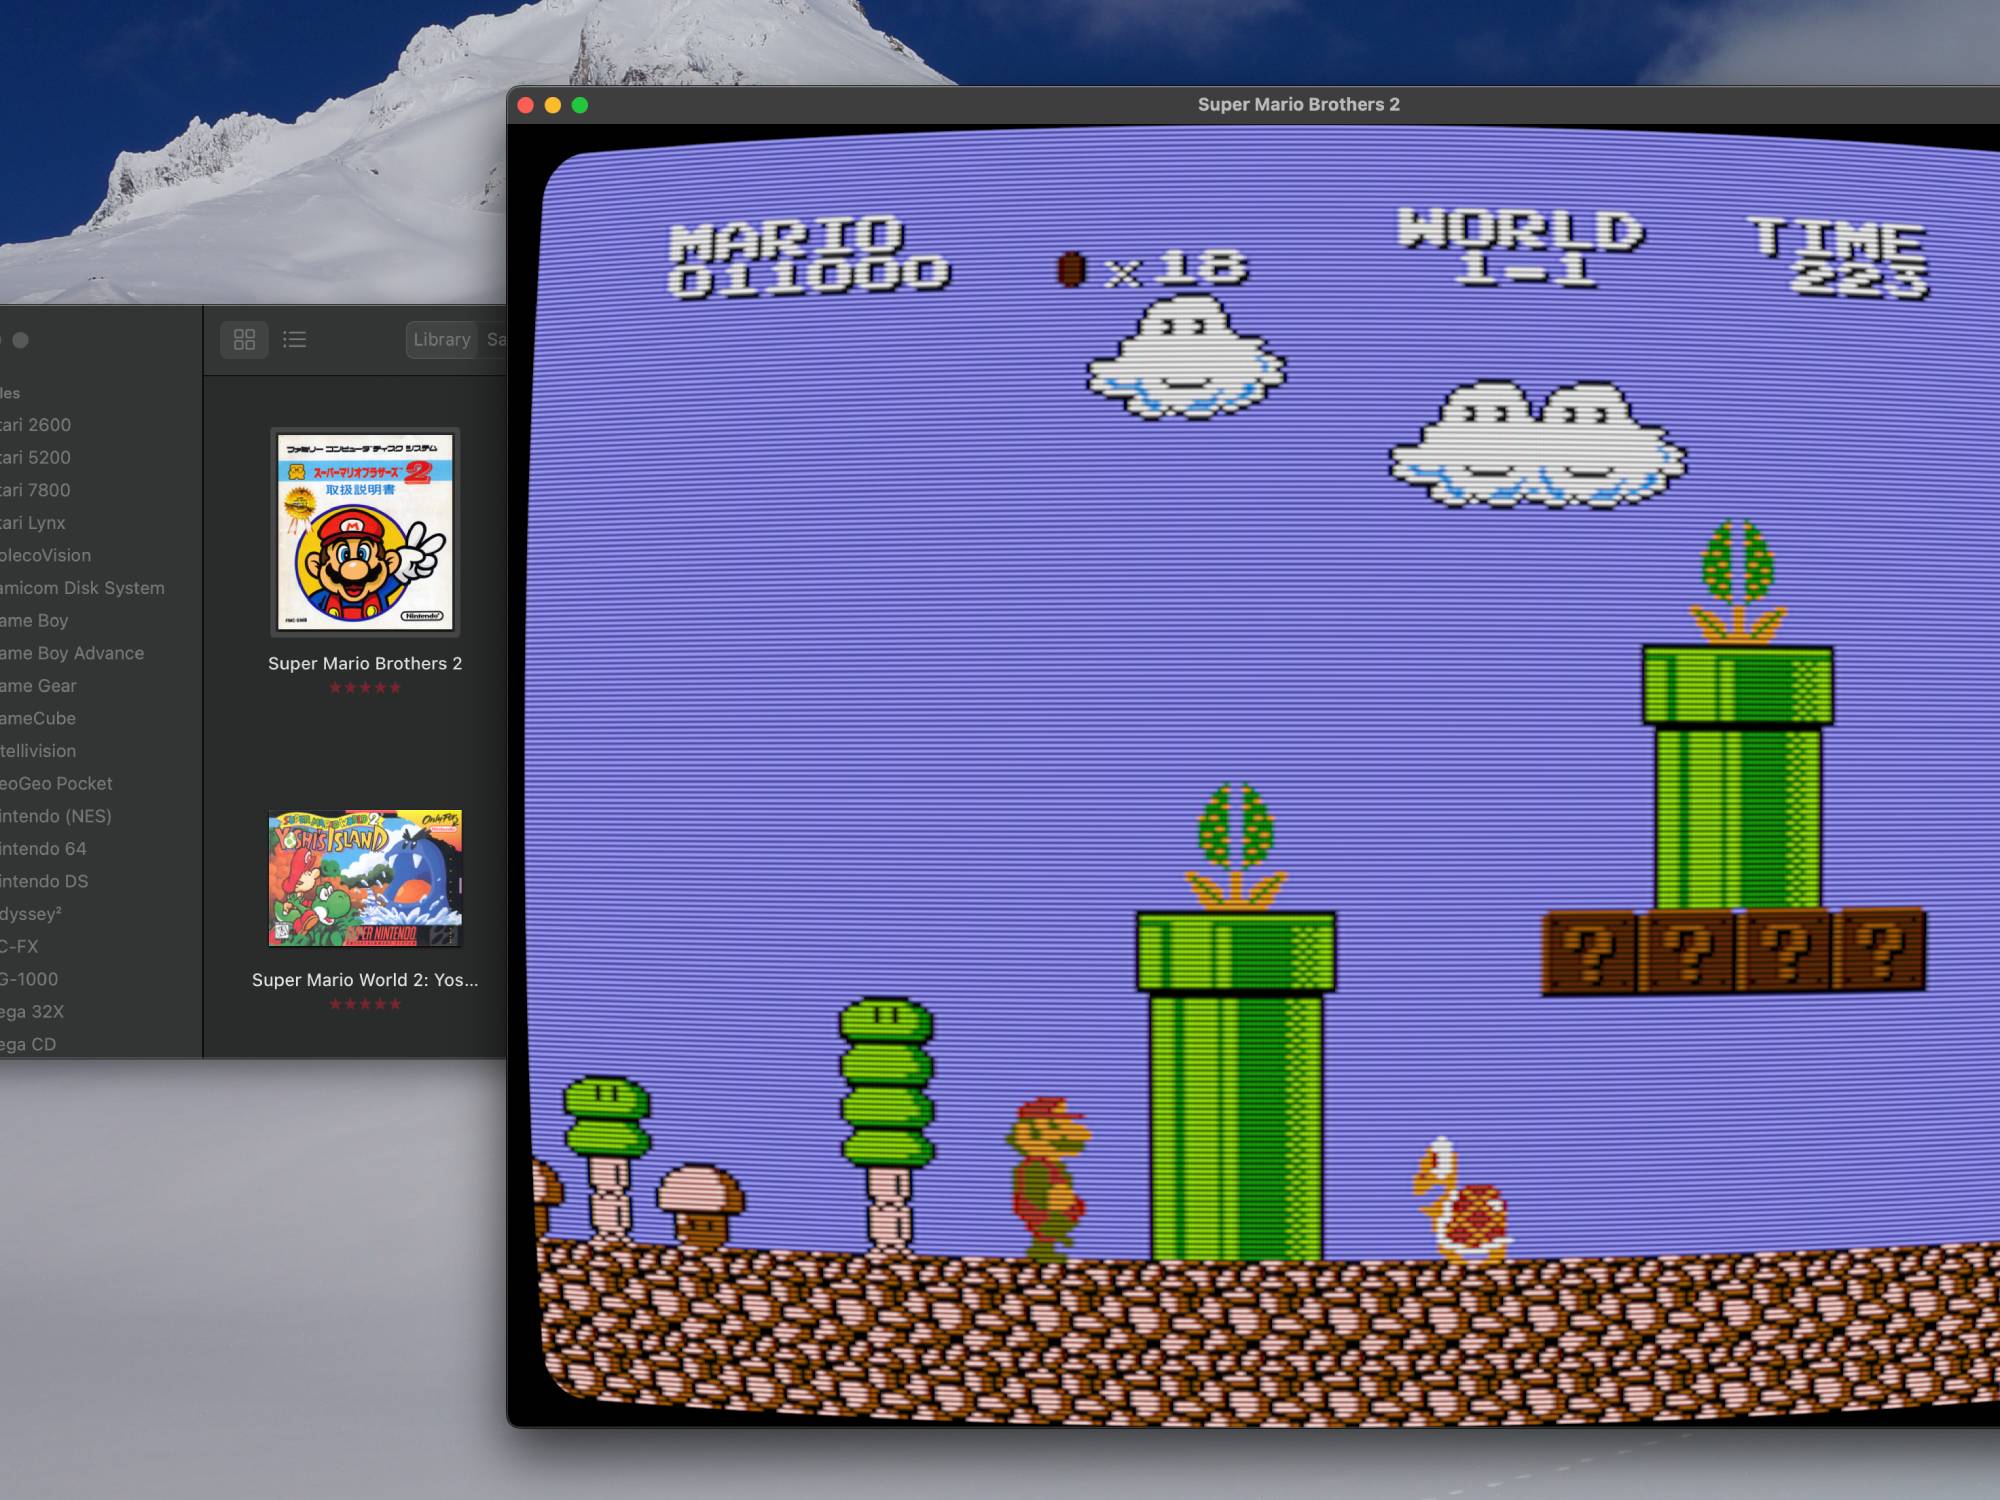 EmuOS: The Ultimate Tool for Emulating Classic Video Games on Your PC -  Softonic